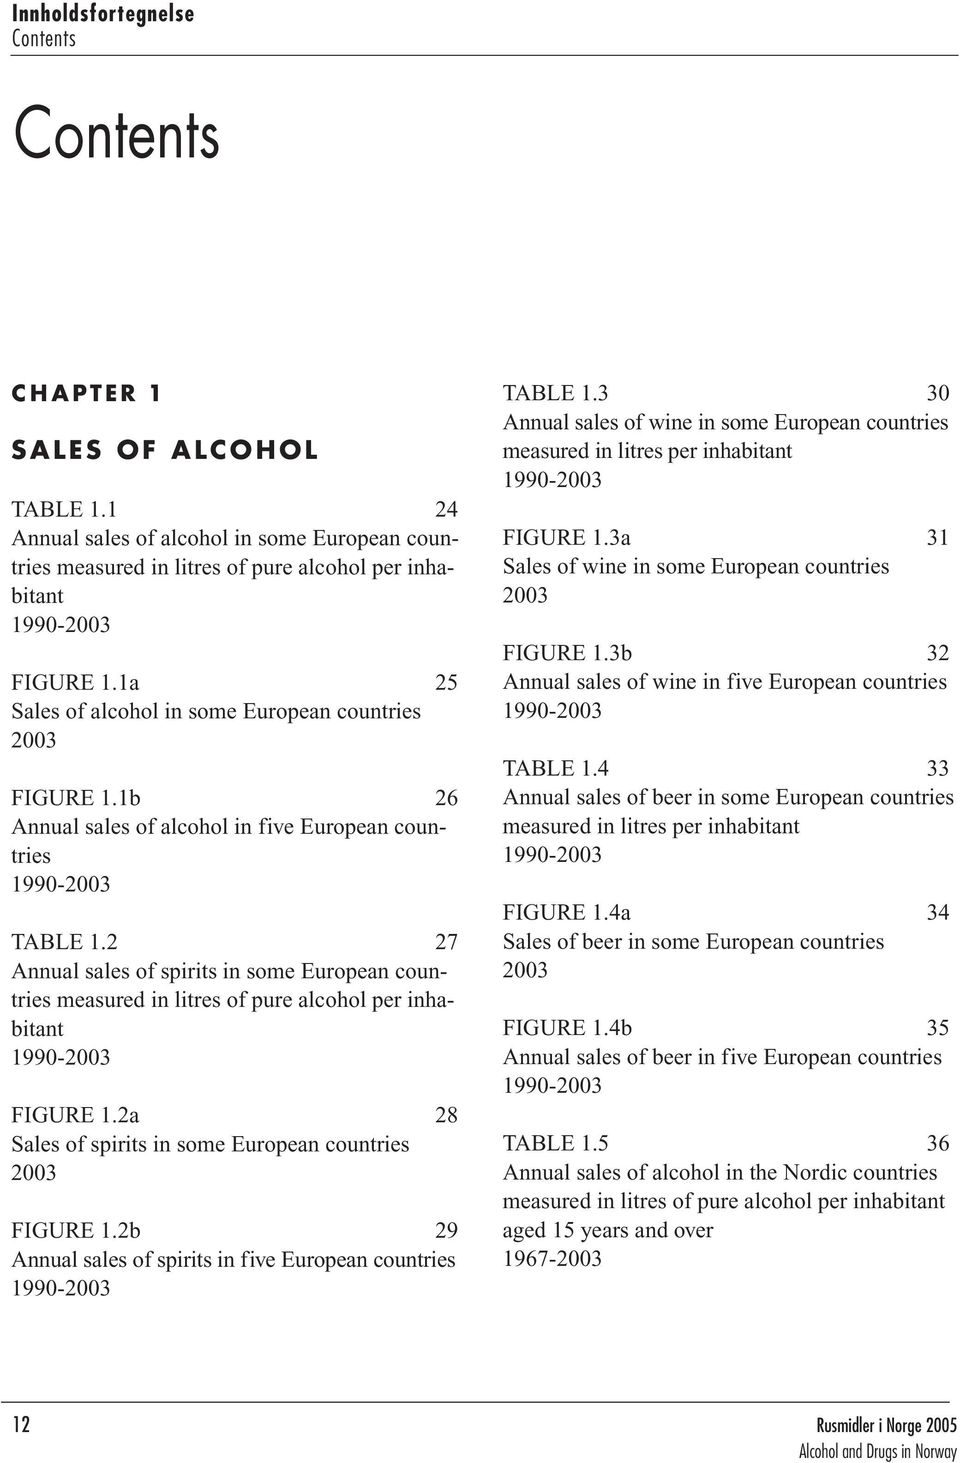 2 27 Annual sales of spirits in some European countries measured in litres of pure alcohol per inhabitant 1990-2003 FIGURE 1.2a 28 Sales of spirits in some European countries 2003 FIGURE 1.